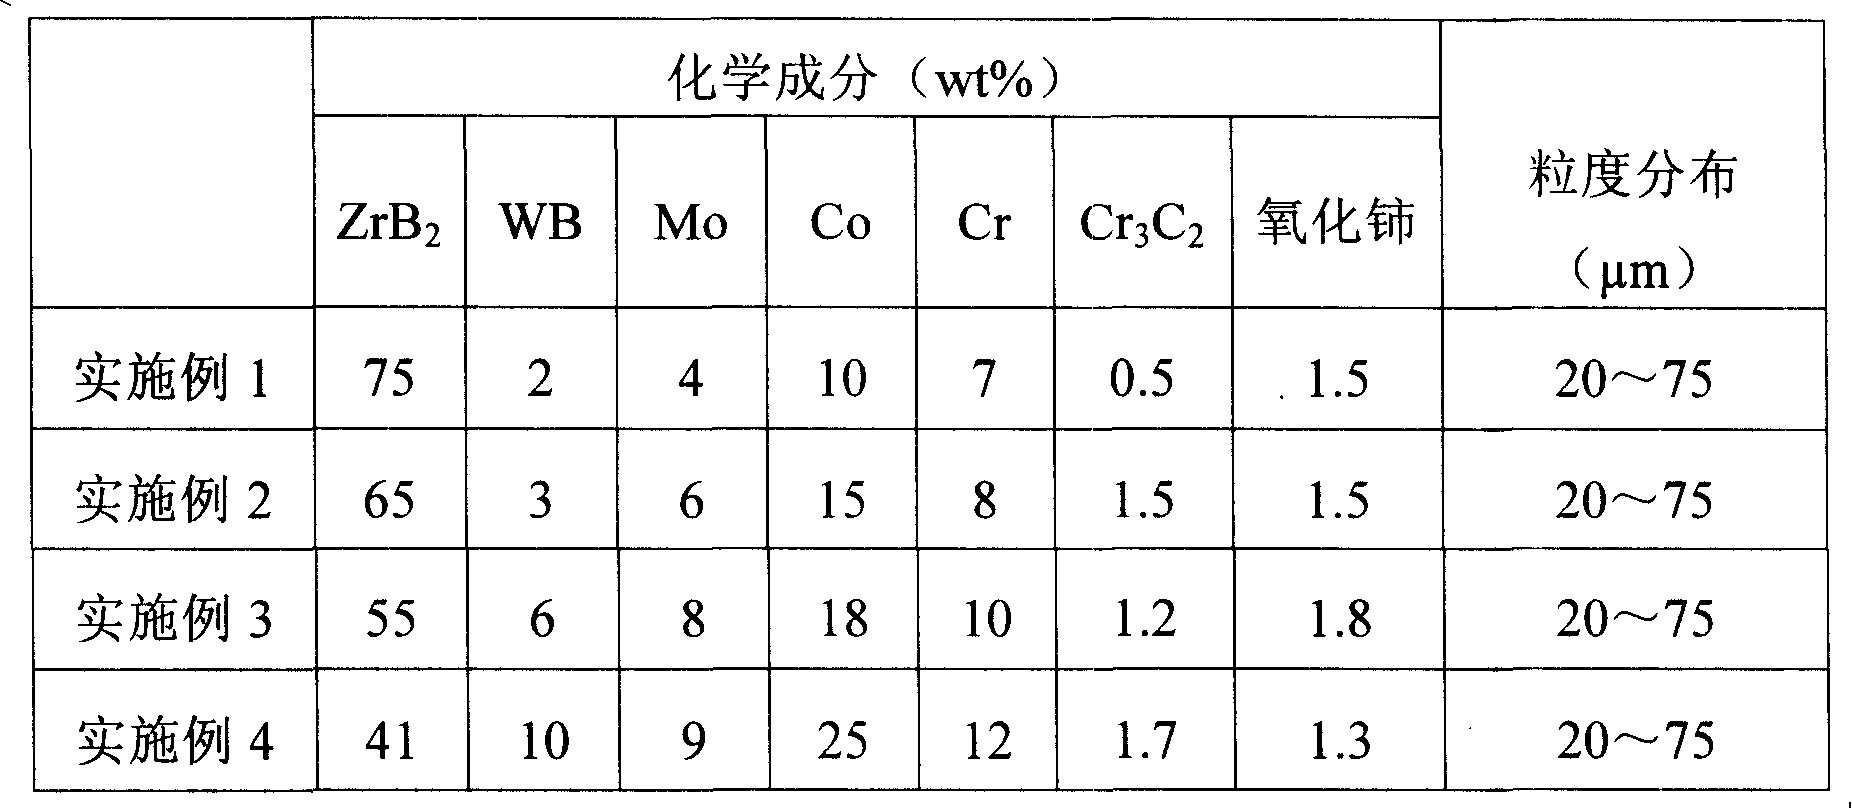 Nano-composite metal ceramic powder for molten metal resistant erosion and method for manufacturing same